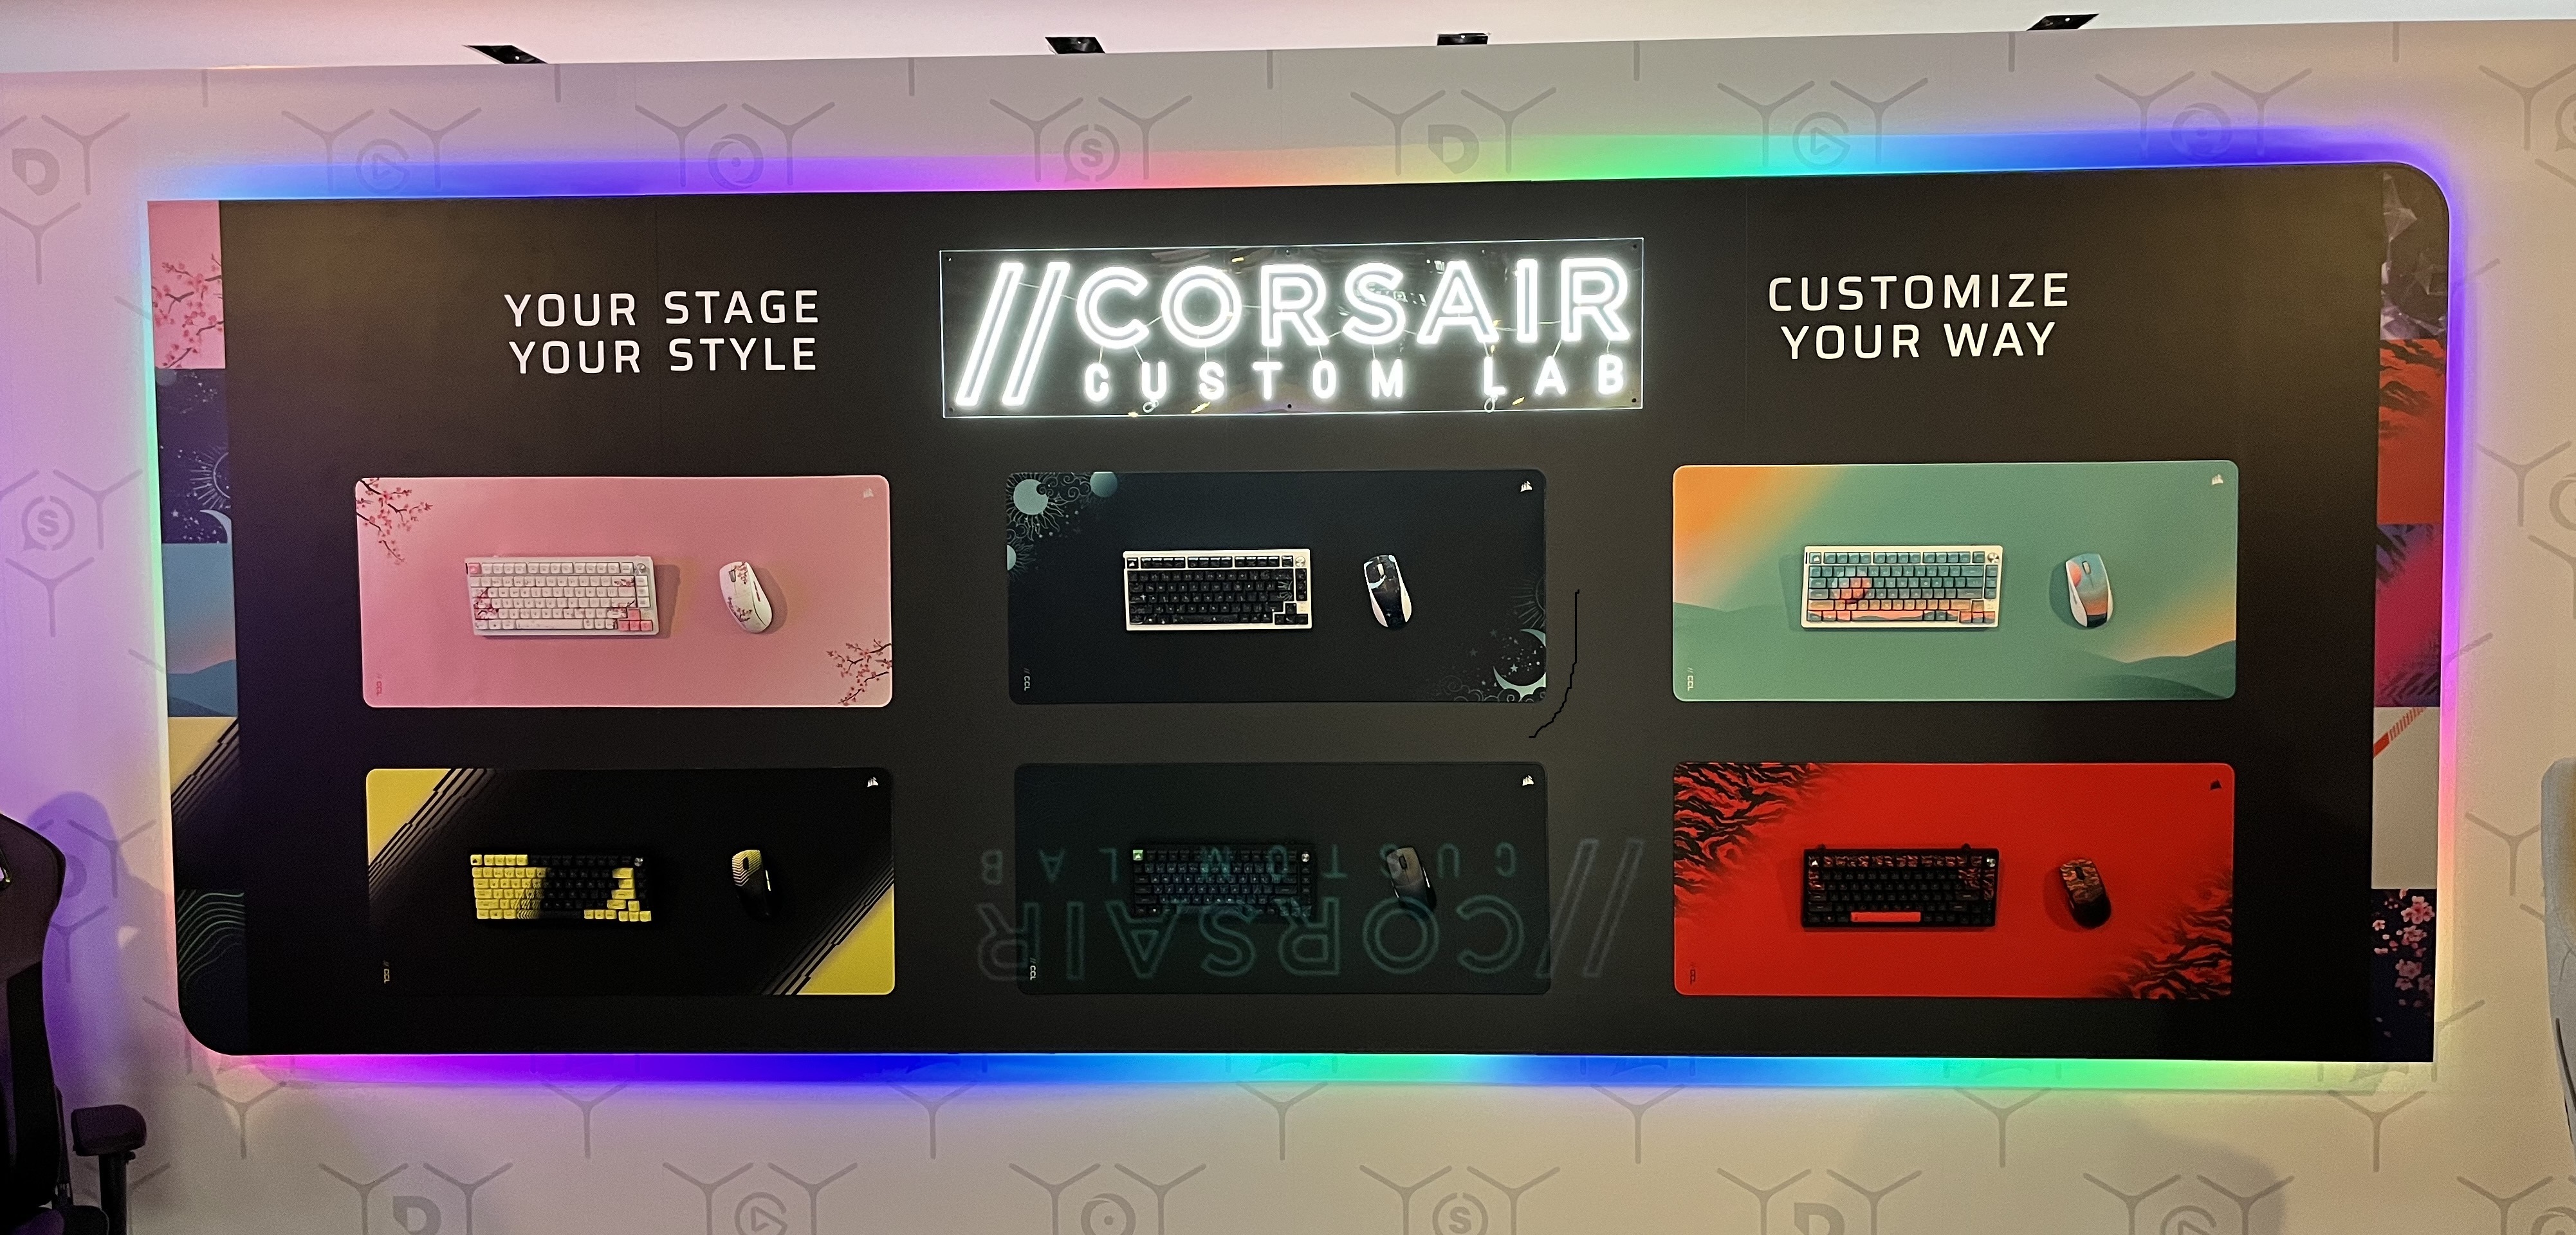 Corsair Unveils Custom Lab Series, Allowing Customers to Personalize Peripherals in Unique Ways